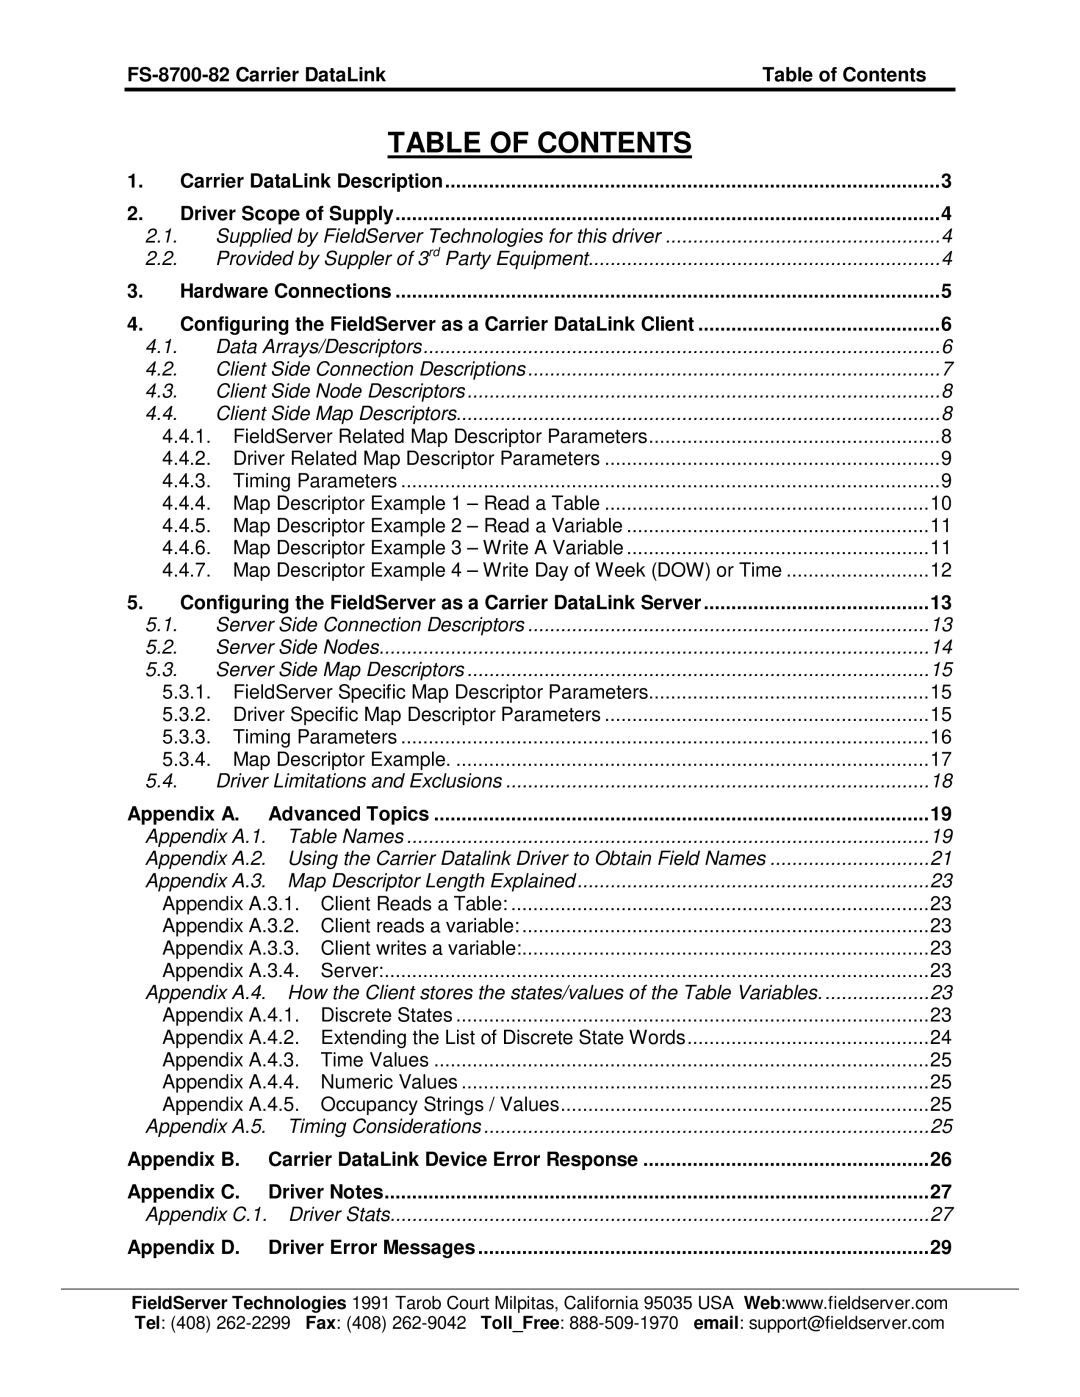 FieldServer FS-8700-82 instruction manual Table of Contents 